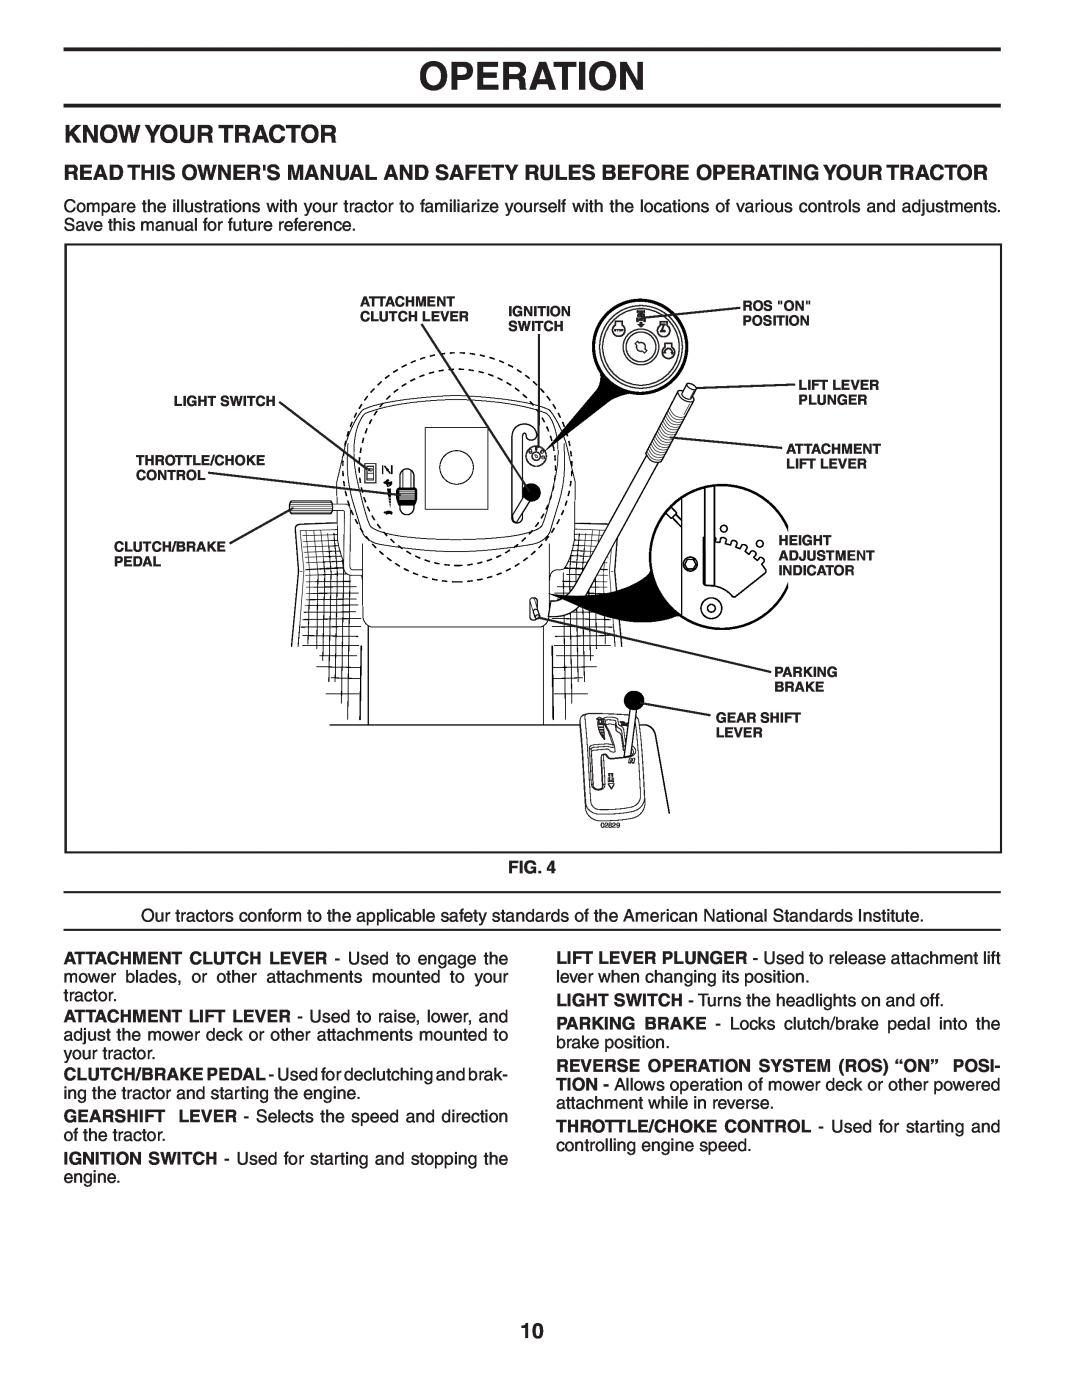 Poulan 403315 manual Know Your Tractor, Operation 